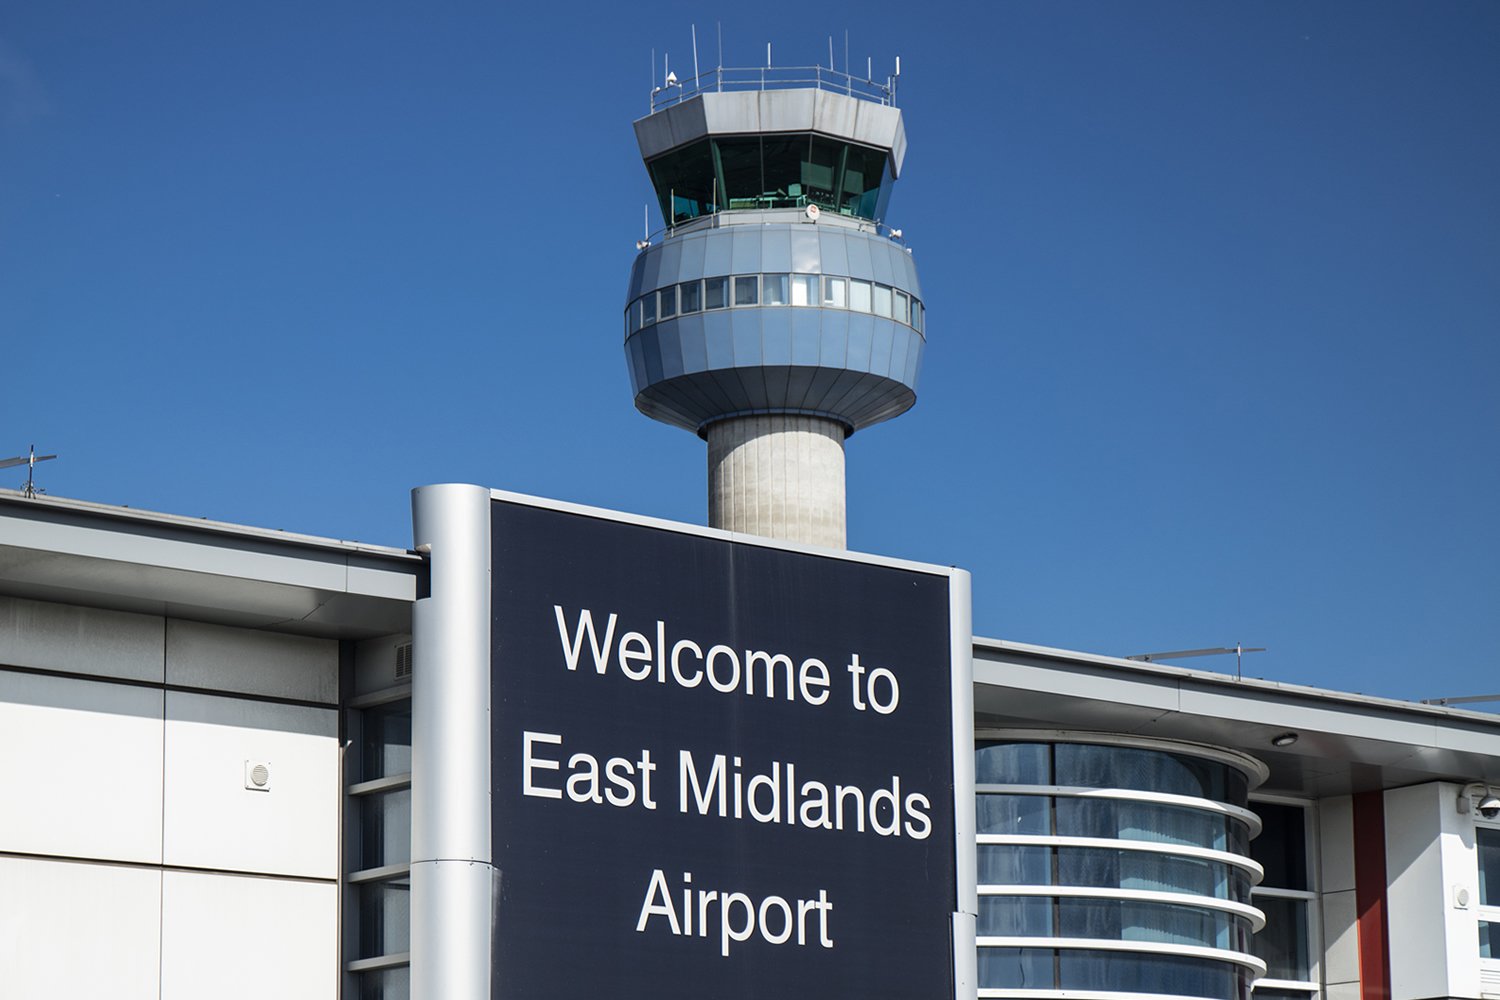 East Midlands Airport control tower